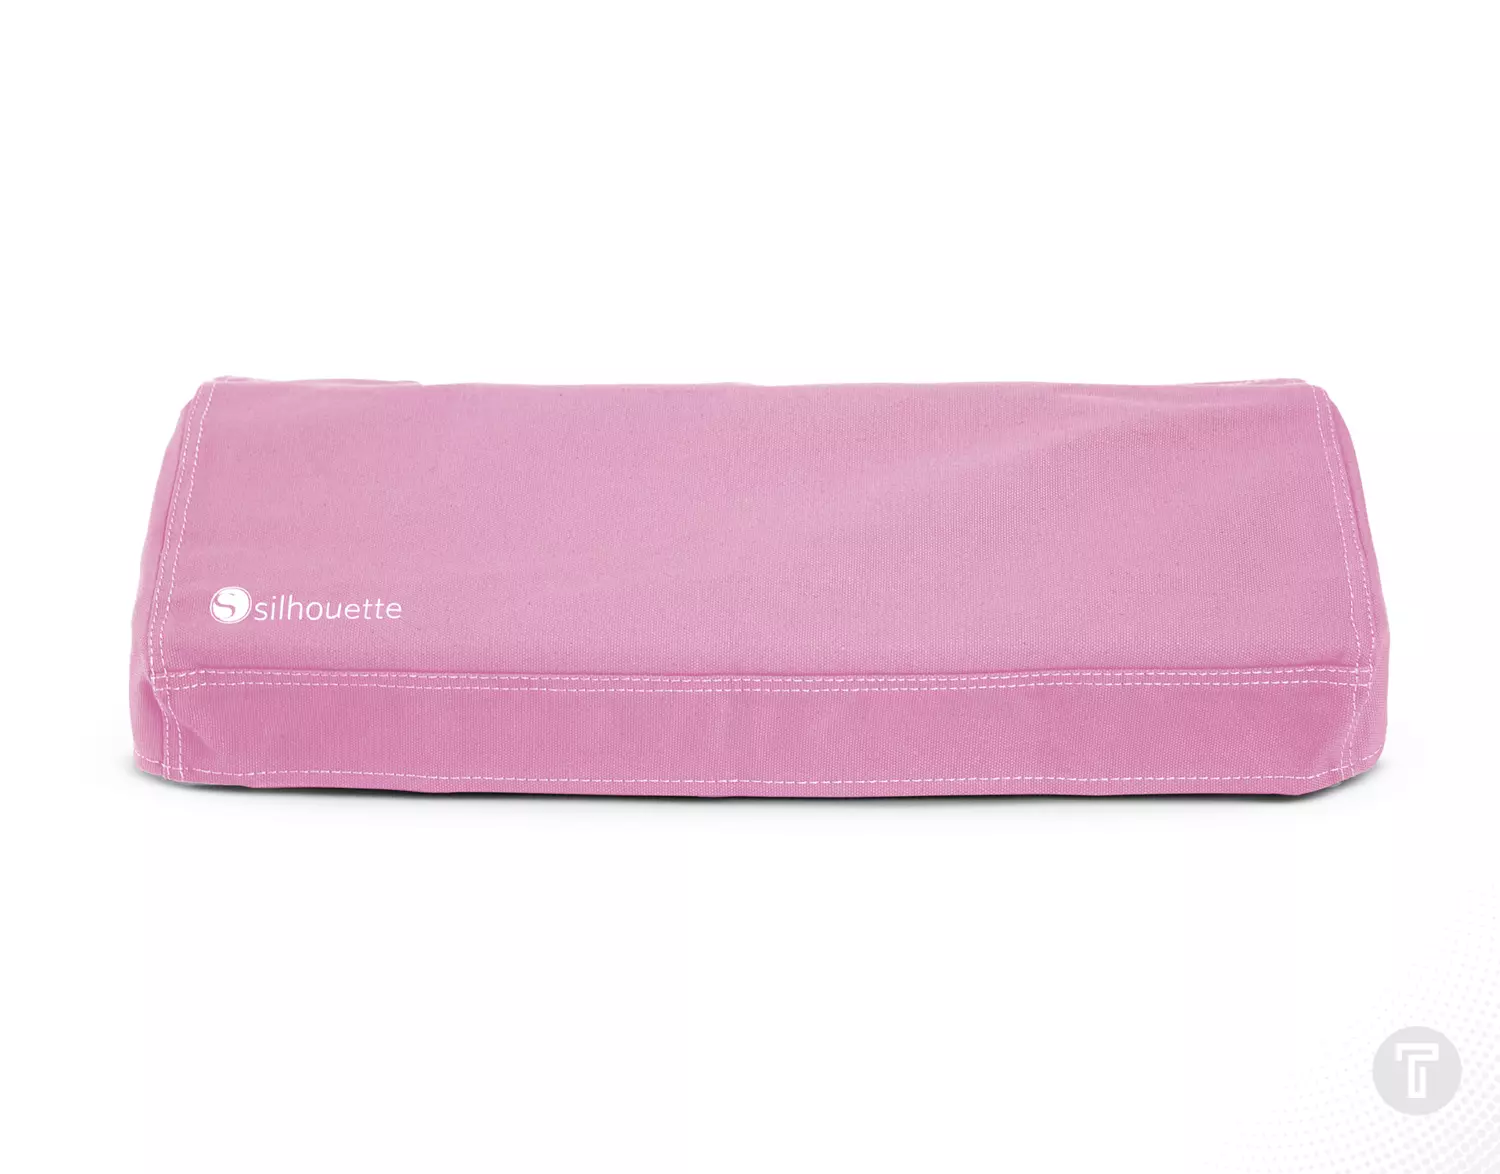 Silhouette cameo 4 dustcover pink